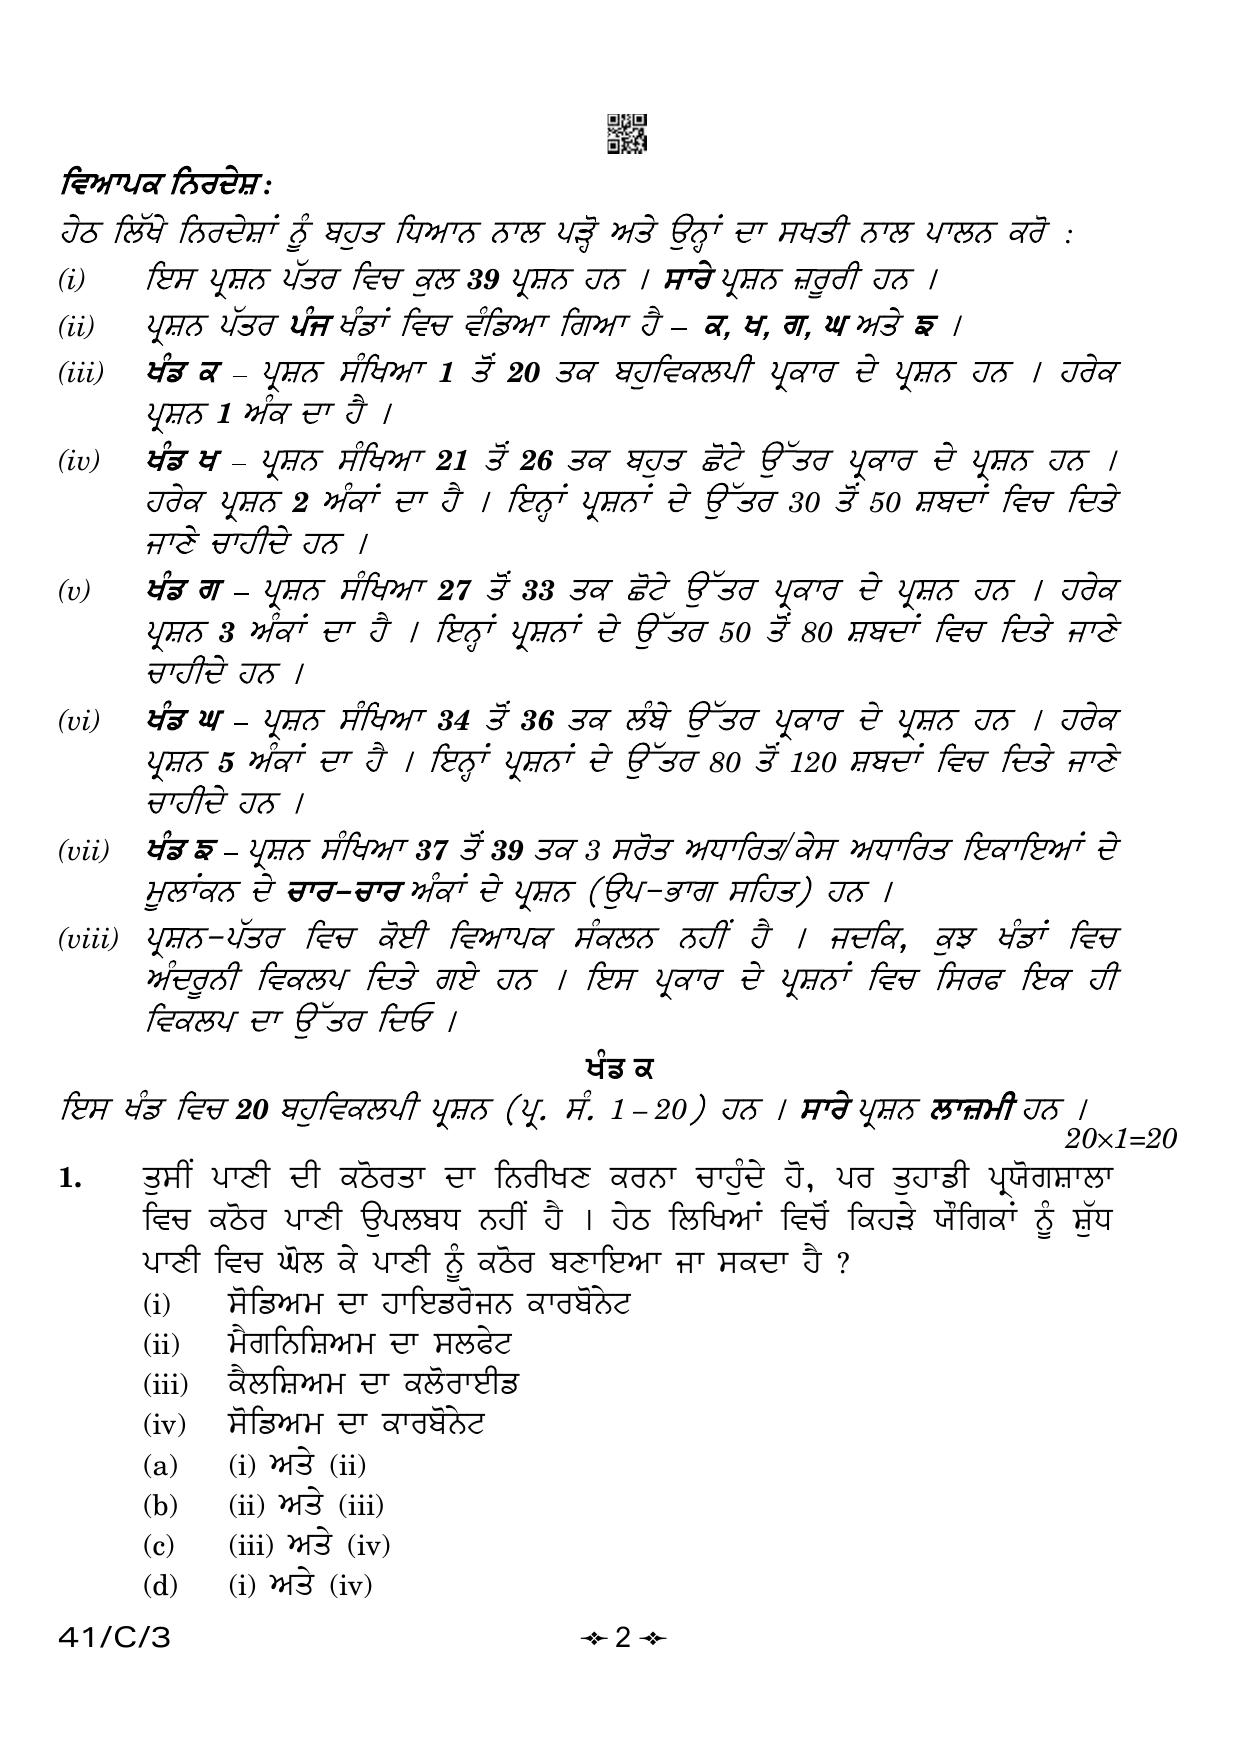 CBSE Class 10 41-3 Science Punjabi 2023 (Compartment) Question Paper - Page 2